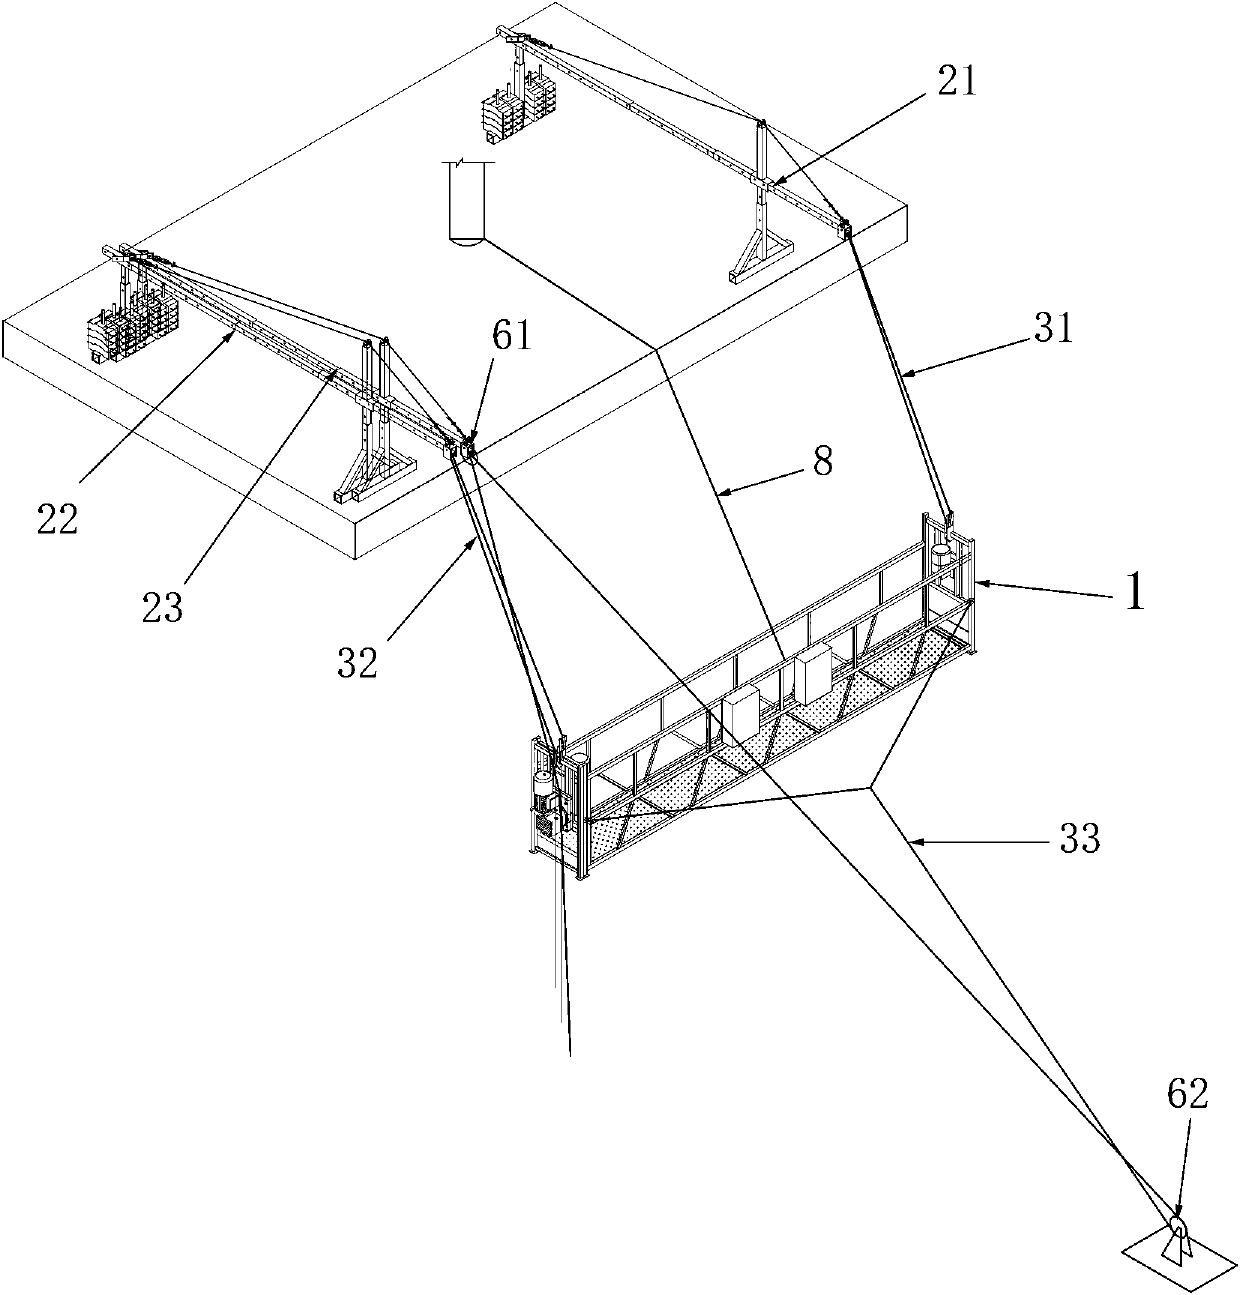 Hanging basket device and construction method for outer slope construction